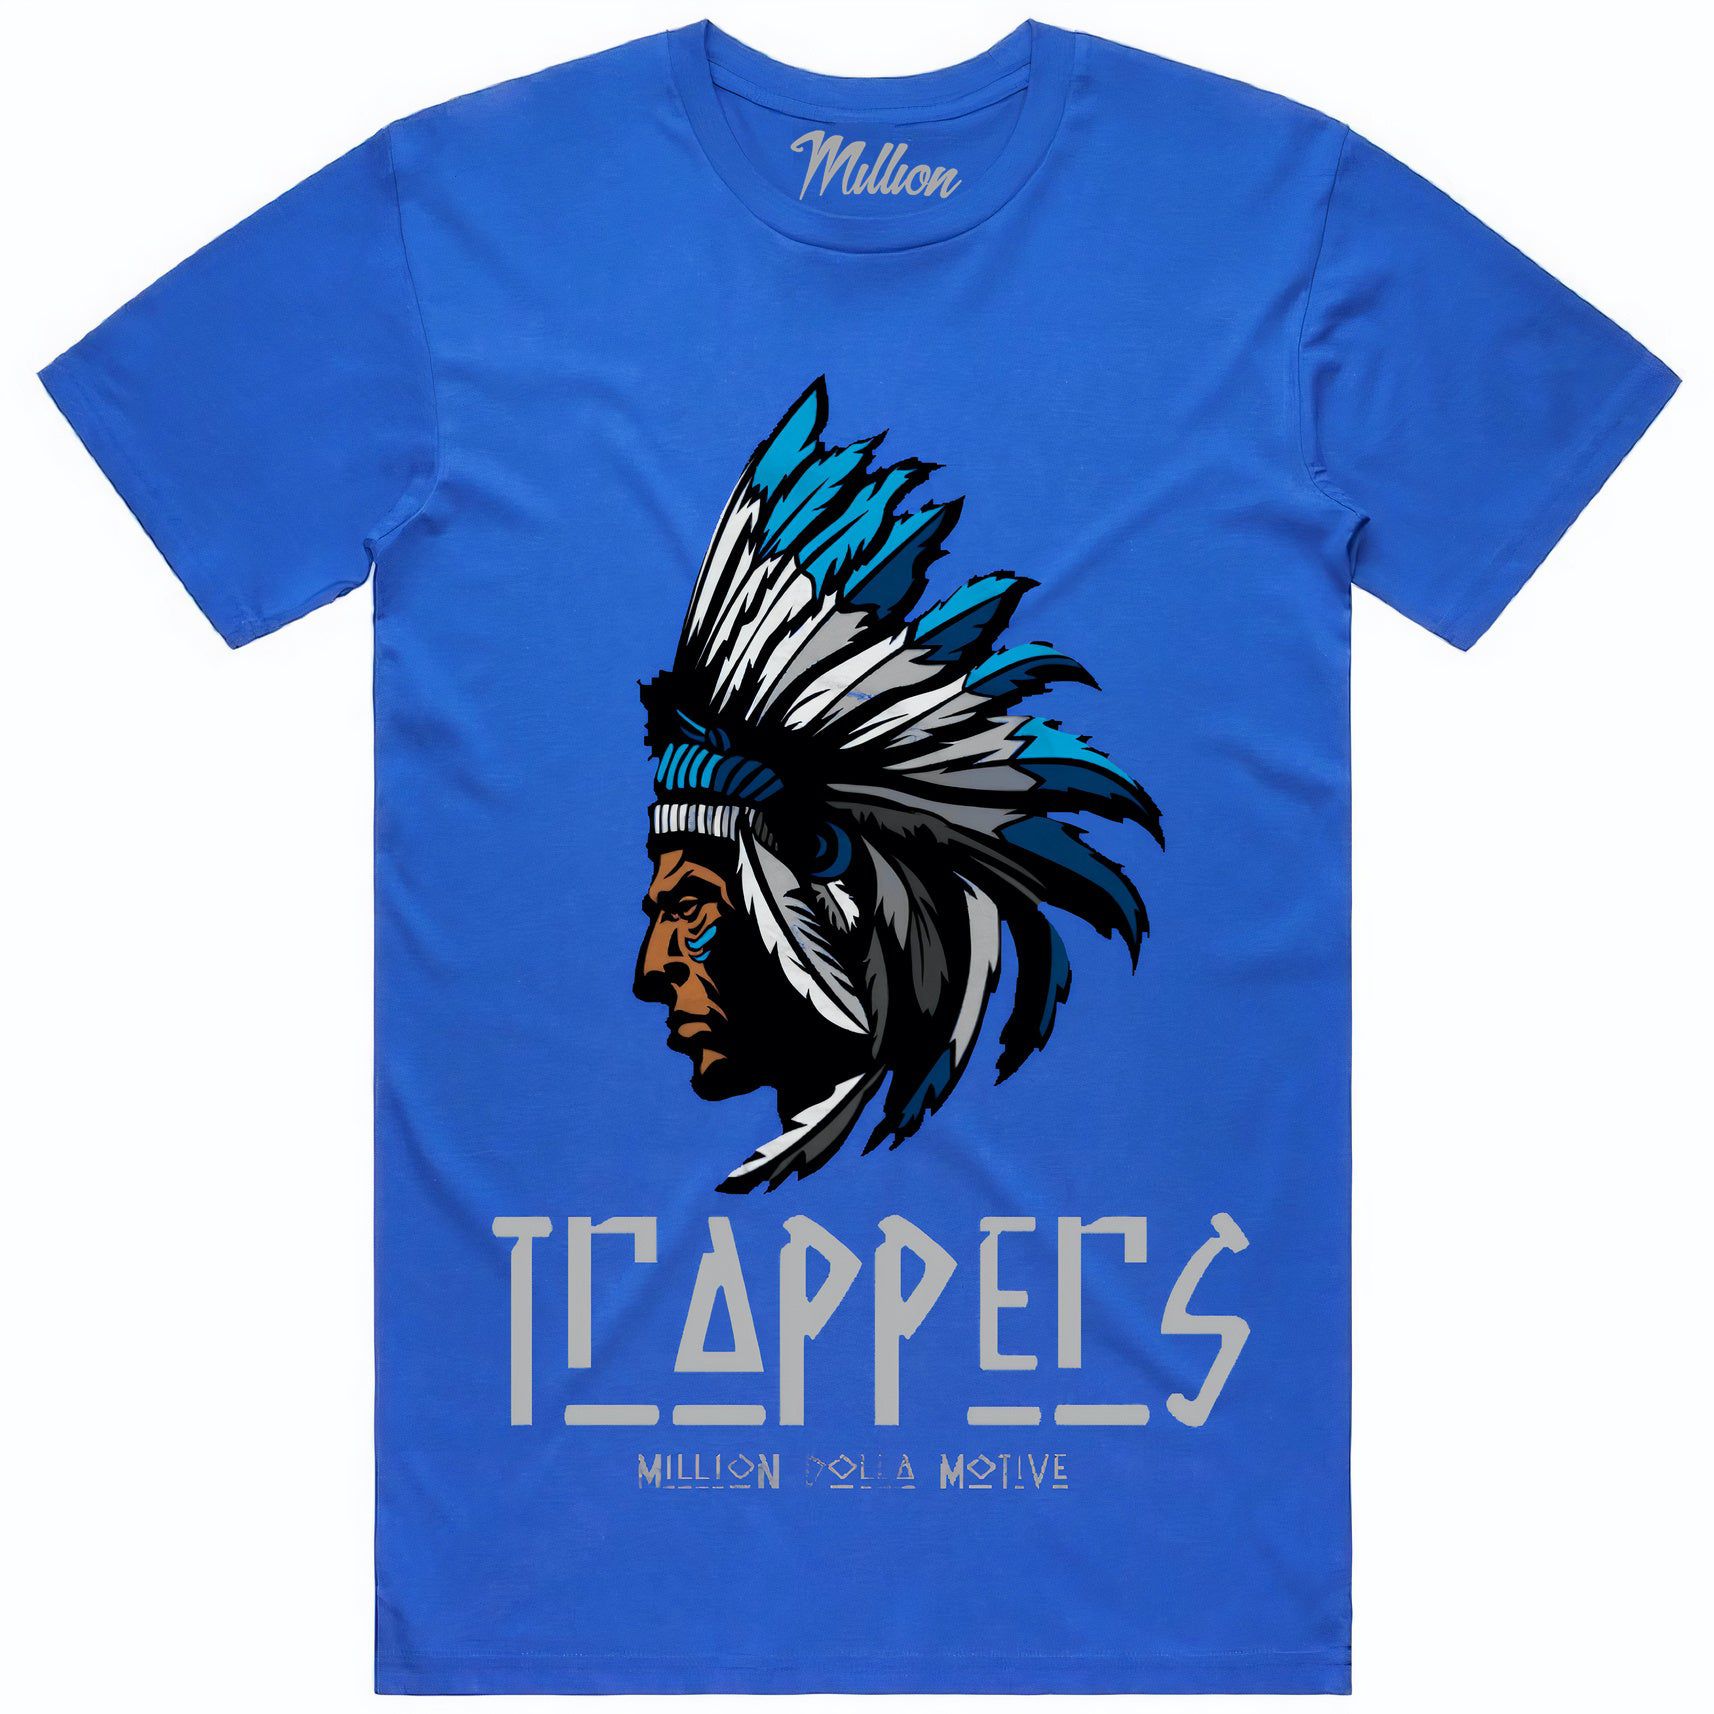 Royal Suede 1s Shirt to Match - Jordan Retro 1 Sneaker Tees - Trappers